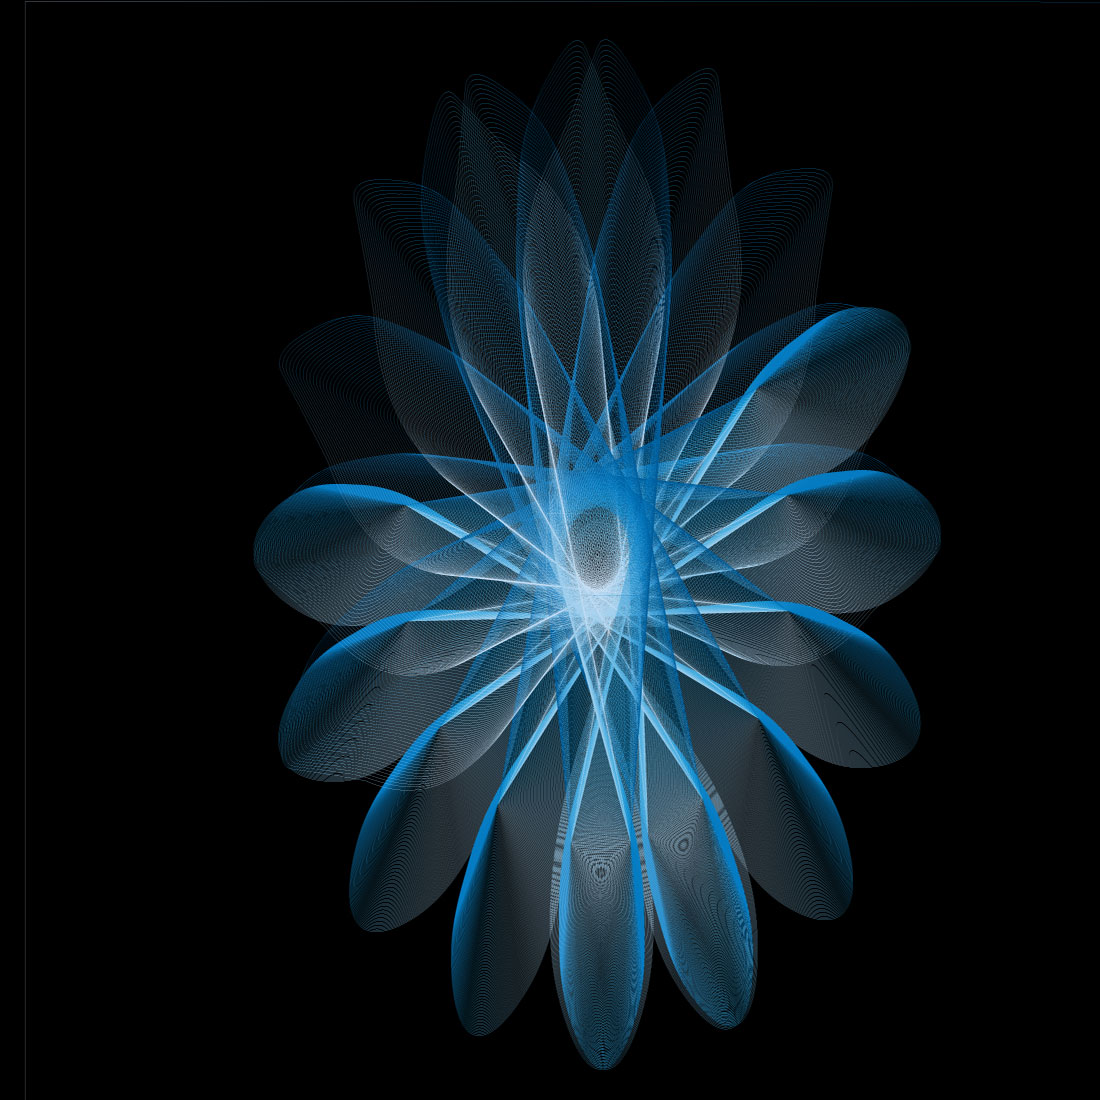 Gradient Background in blue flower with black background preview image.